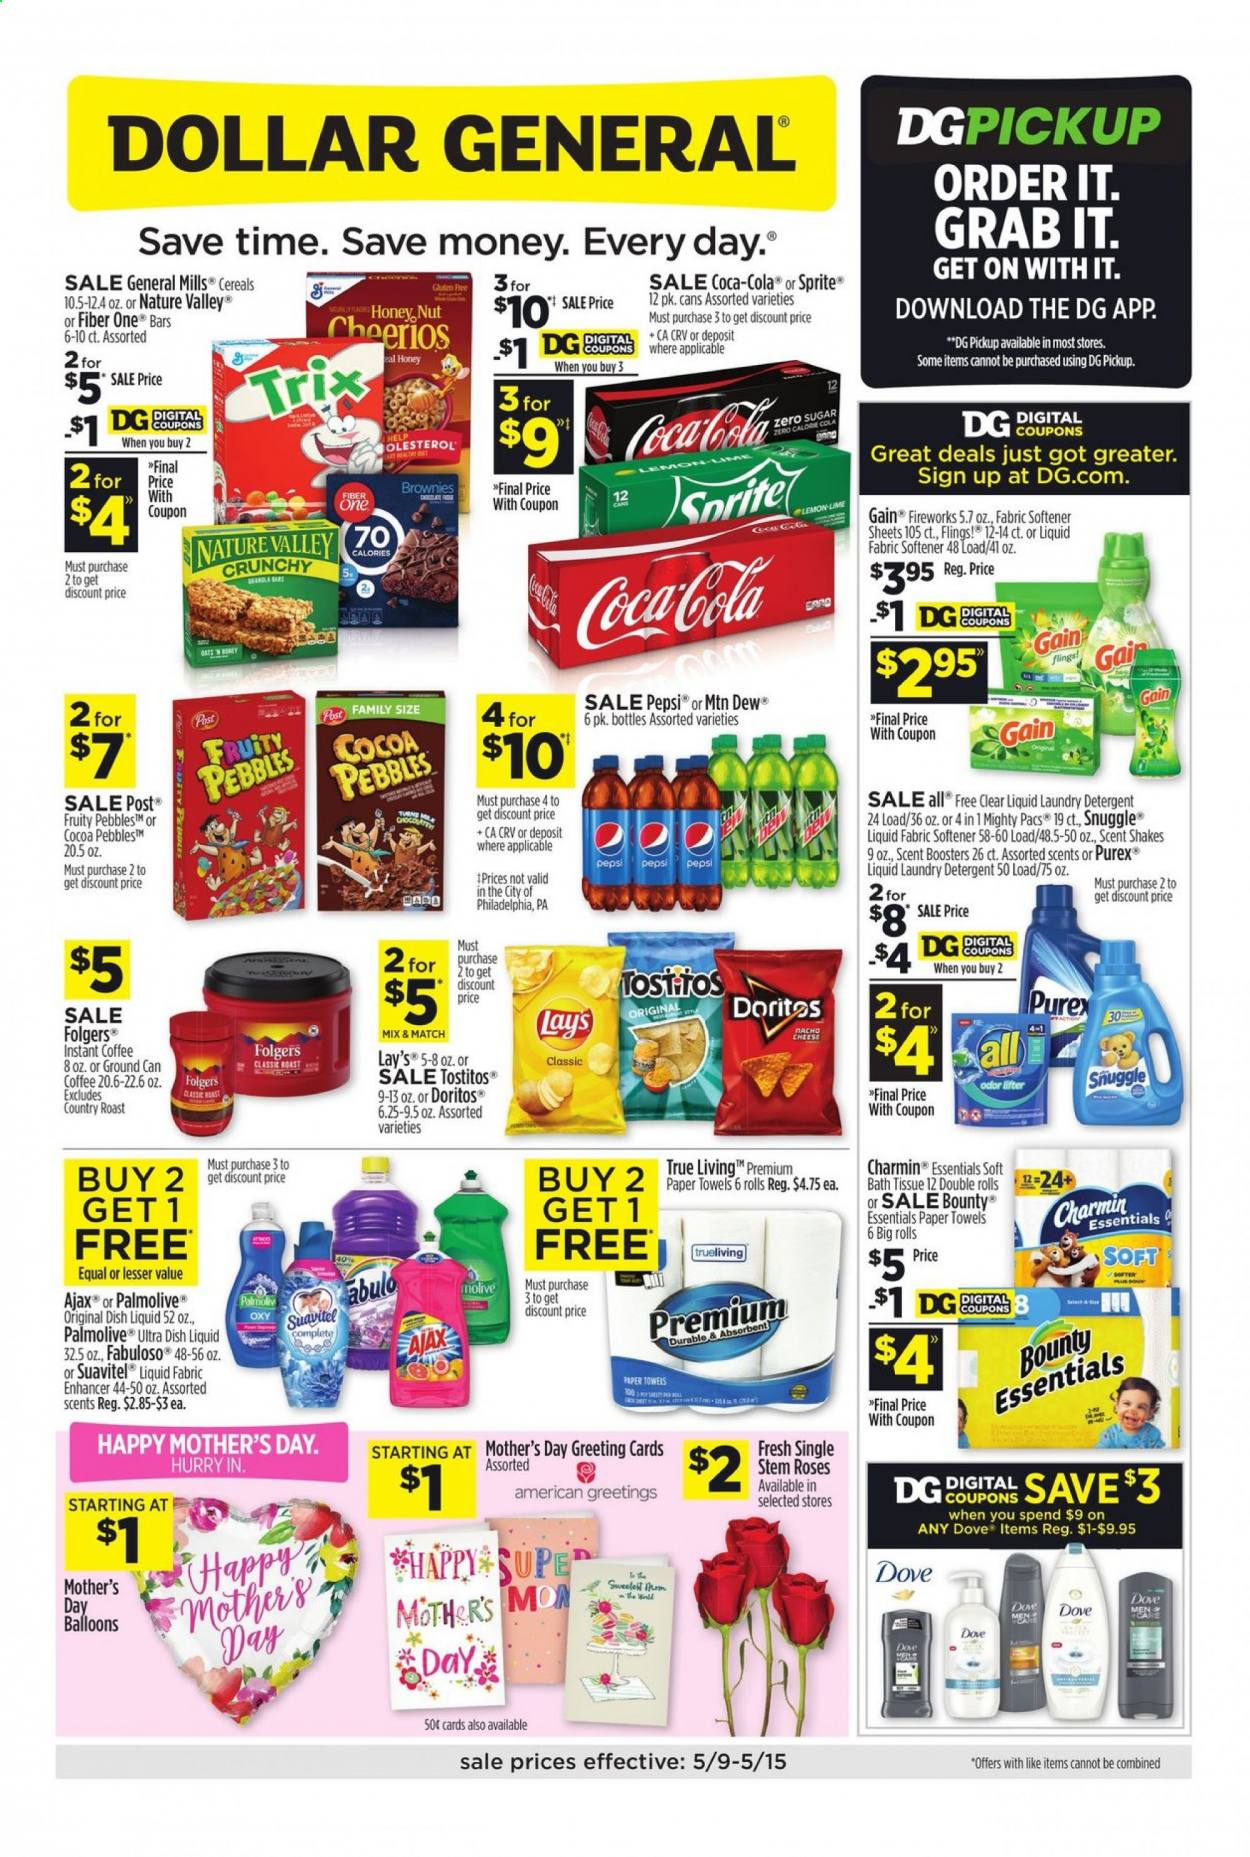 thumbnail - Dollar General Flyer - 05/09/2021 - 05/15/2021 - Sales products - brownies, shake, Bounty, Doritos, Lay’s, Tostitos, cereals, Cheerios, Fruity Pebbles, Nature Valley, Fiber One, Coca-Cola, Mountain Dew, Sprite, Pepsi, instant coffee, Folgers, Dove, bath tissue, kitchen towels, paper towels, Charmin, detergent, Gain, Ajax, Fabuloso, Snuggle, fabric softener, laundry detergent, scent booster, Gain Fireworks, Purex, dishwashing liquid, Palmolive, balloons, rose. Page 1.